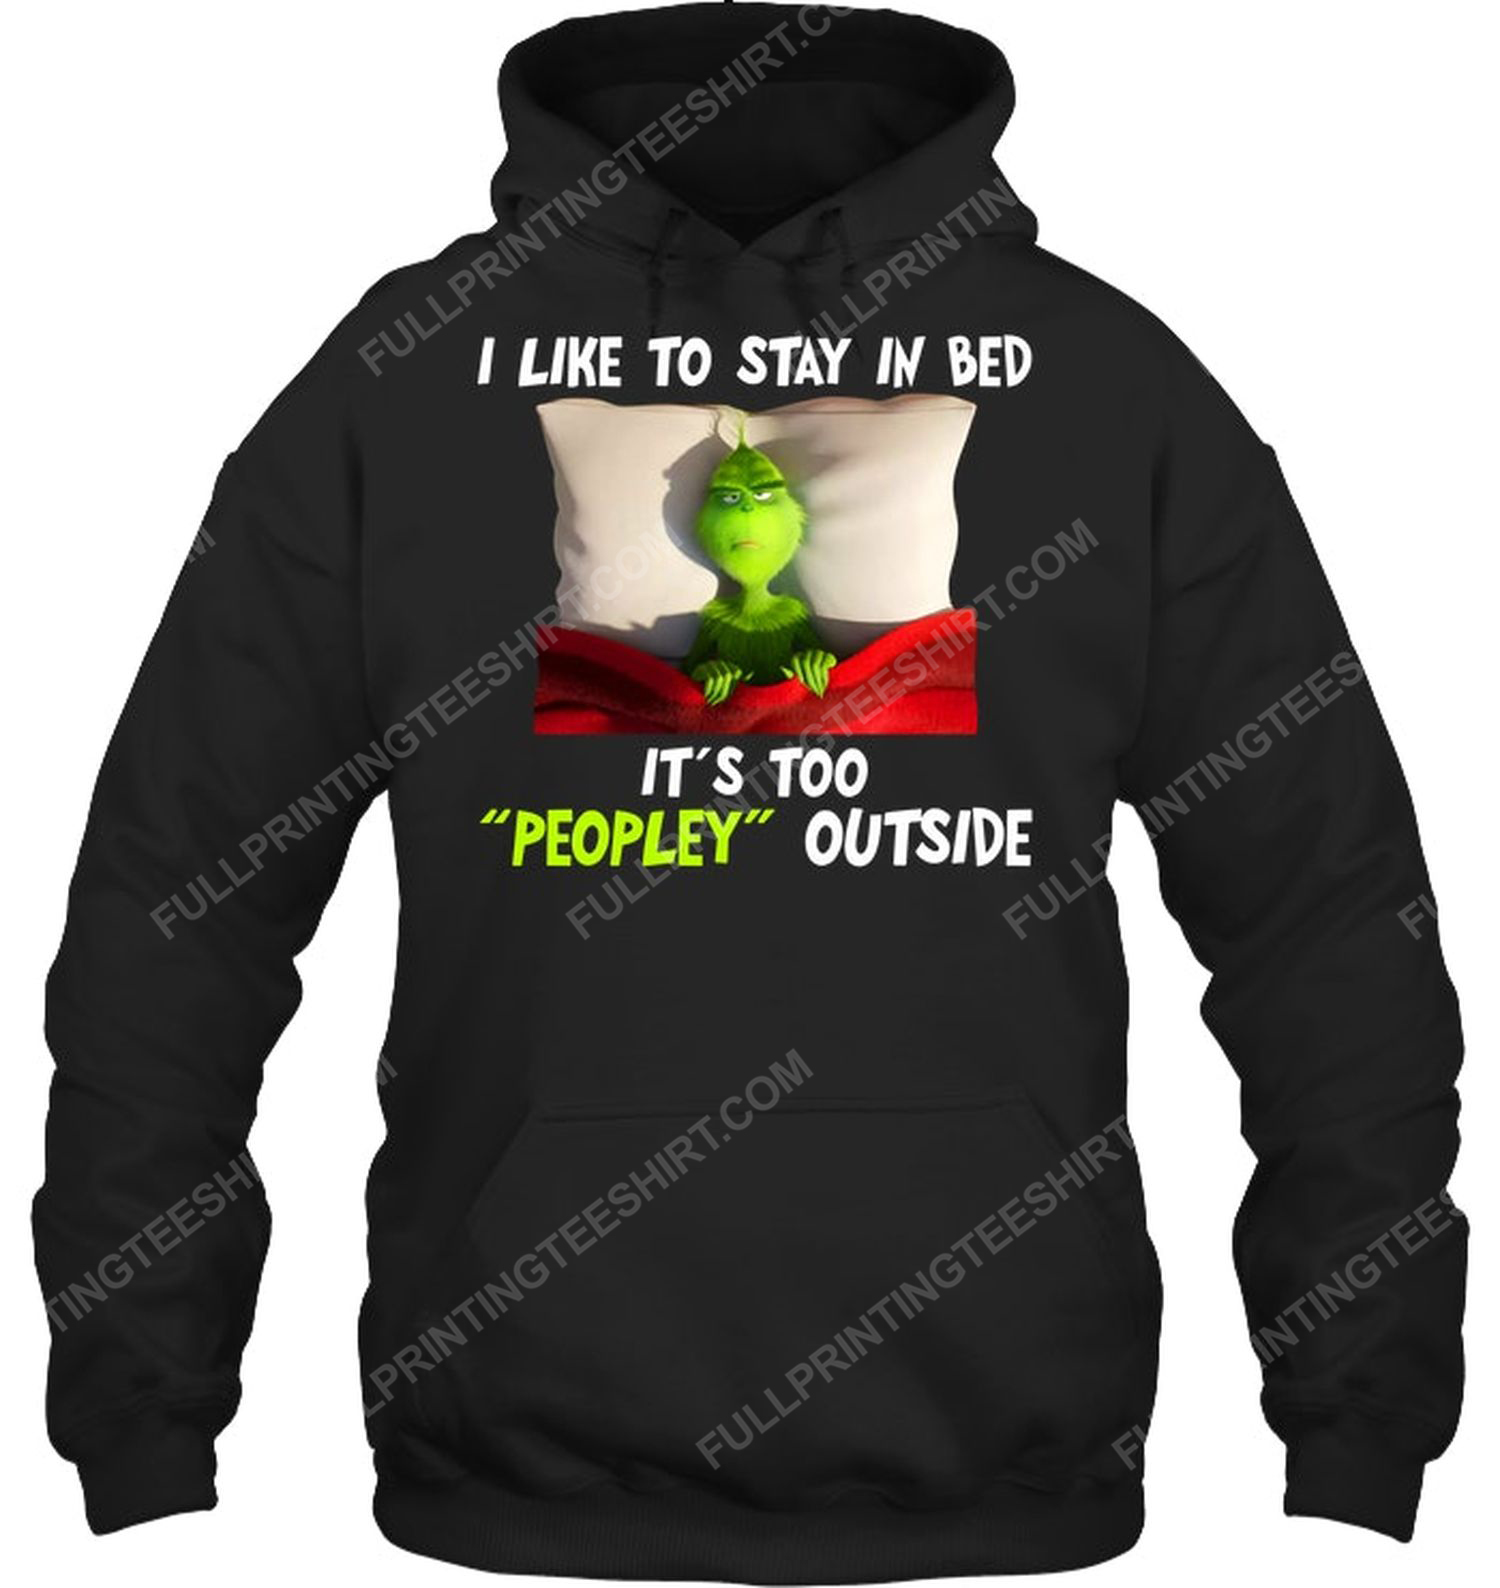 Grinch i like to stay in bed it's too peopley outside hoodie